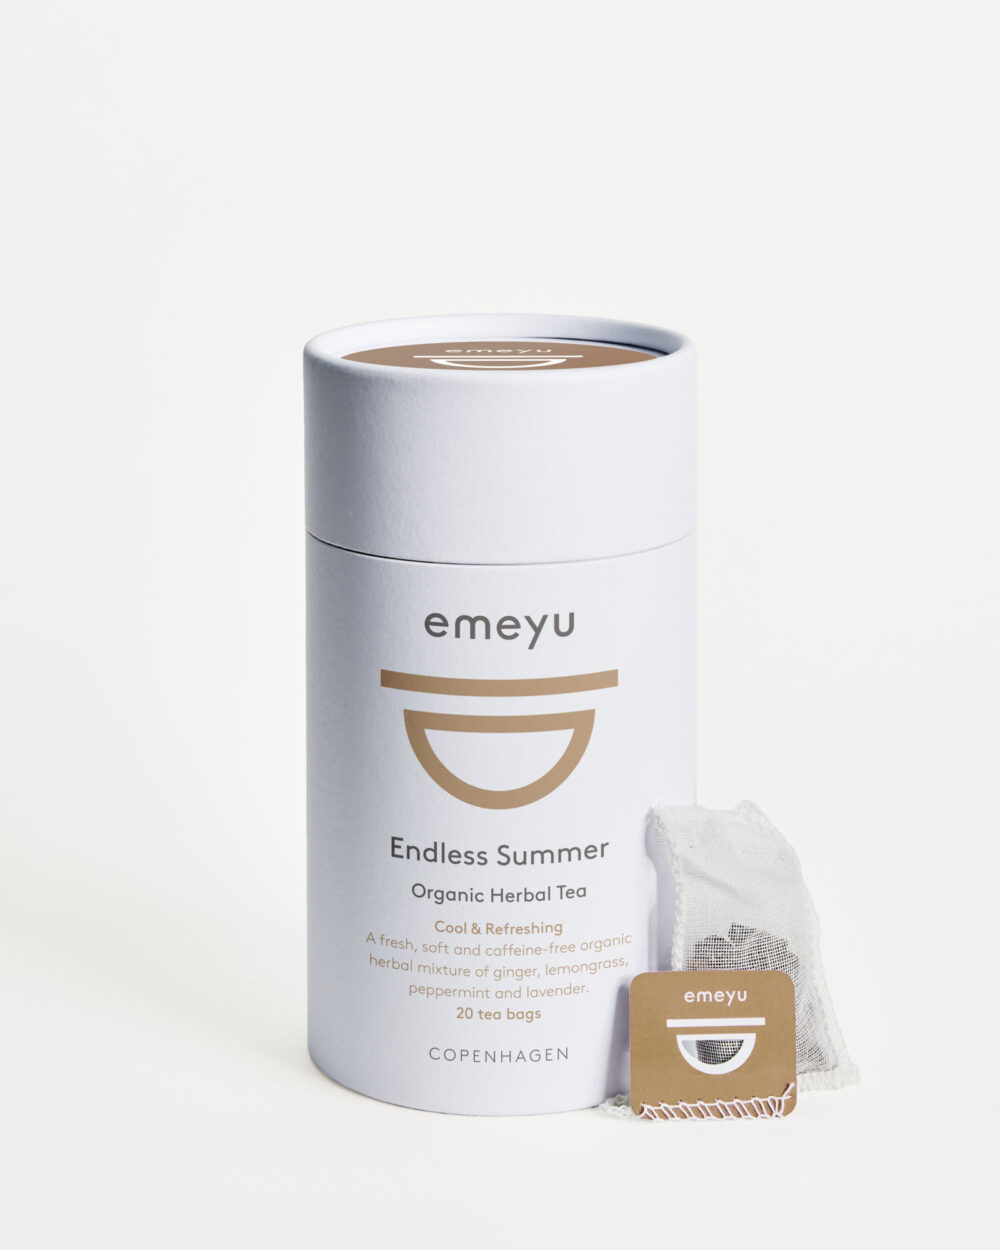 Endless Summer is an organic caffeine-free herbal tea with ginger, peppermint, lemongrass and lavender, 20 hand sewn cotton teabags in a tube.